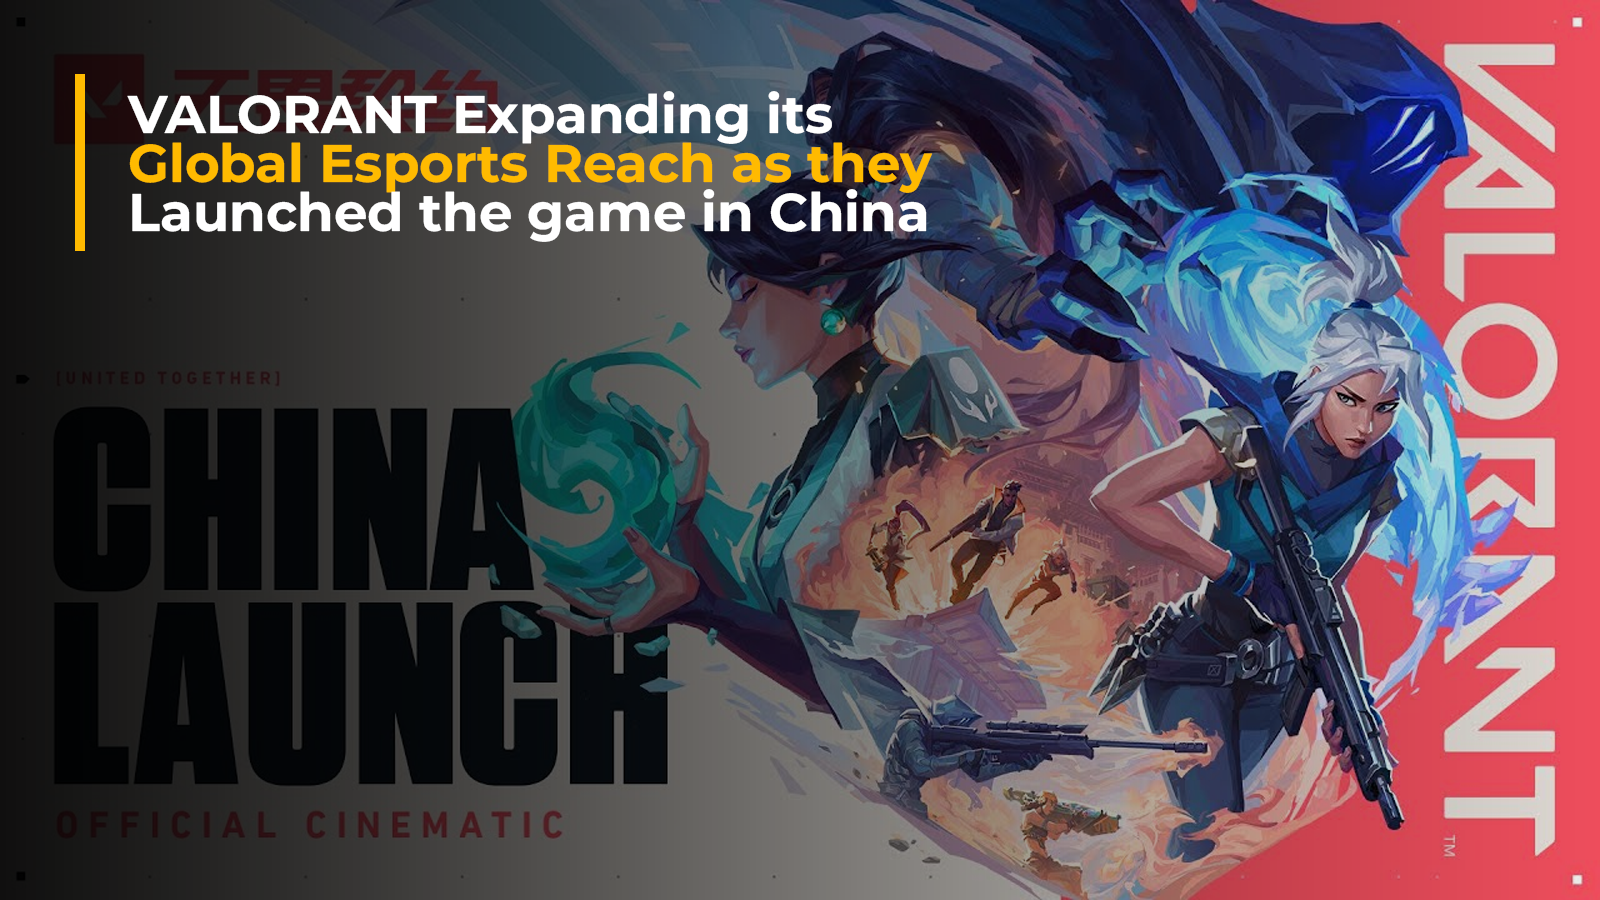 VALORANT Makes a Splash in China, Expanding its Global Esports Reach